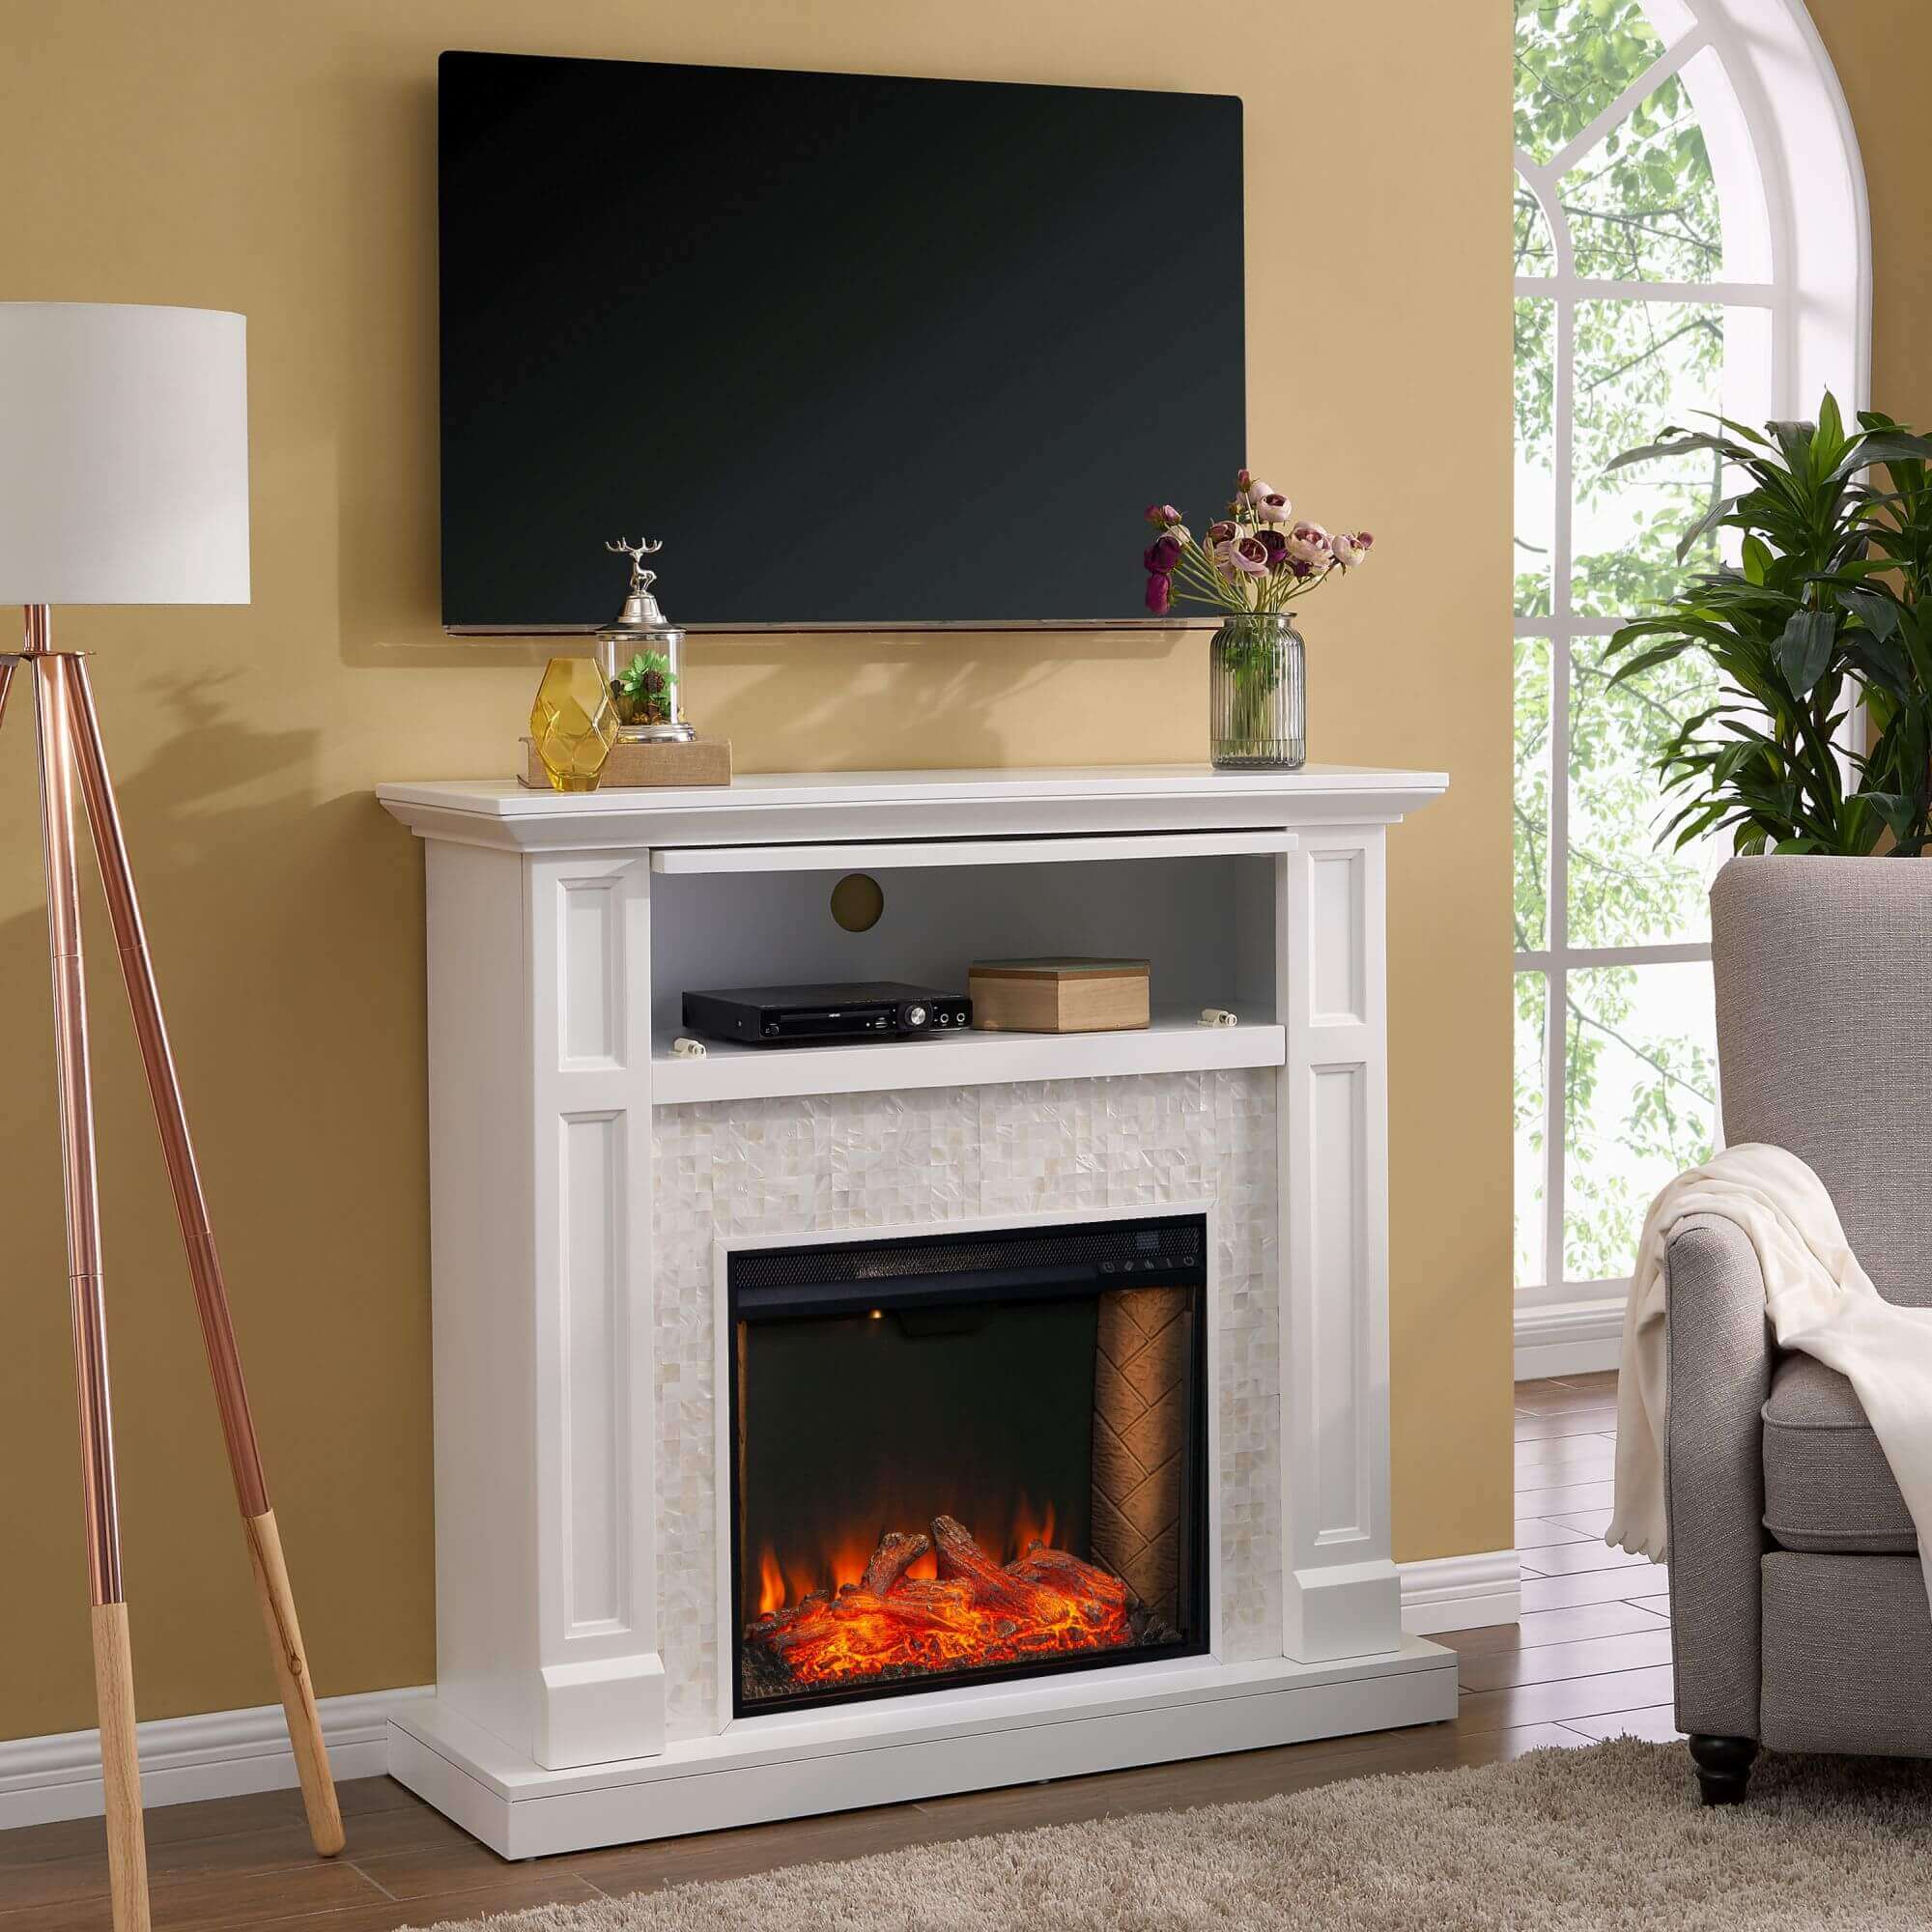 Nobleman Smart Media Fireplace with Tile Surround